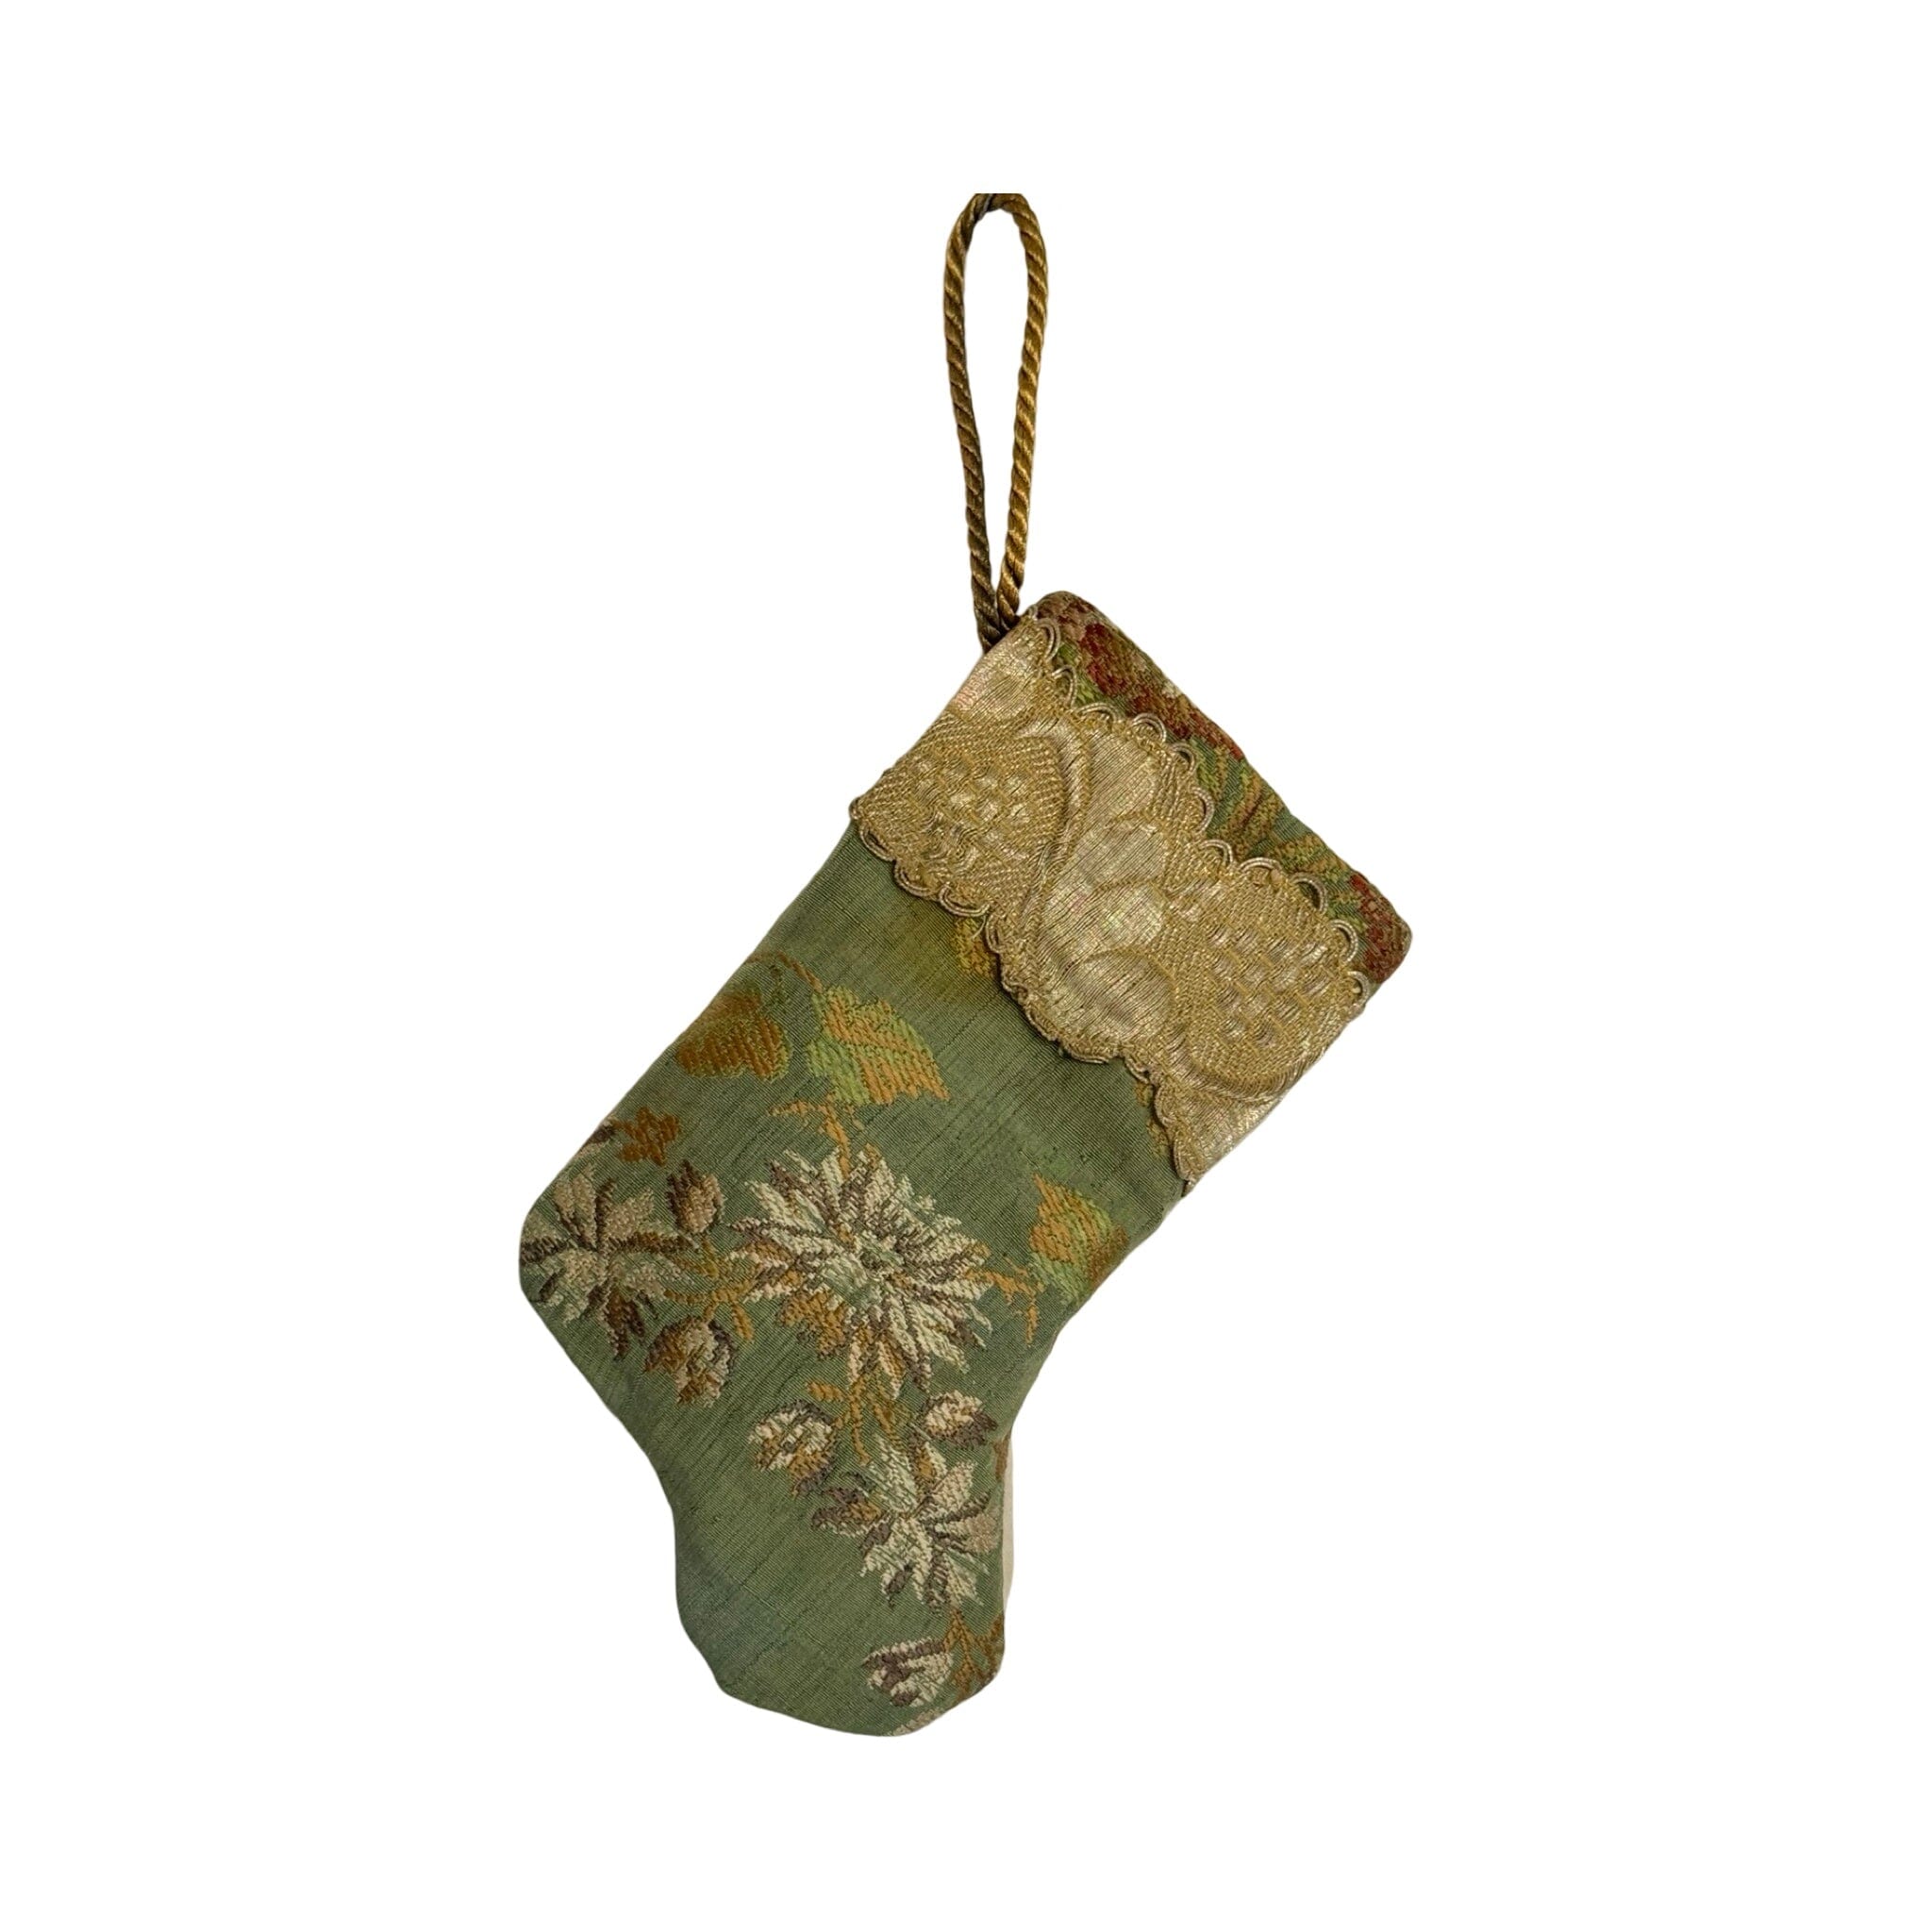 Handmade Mini Stocking Made From Vintage Fabric and Trims- Green Floral Ornament B. Viz Design M 